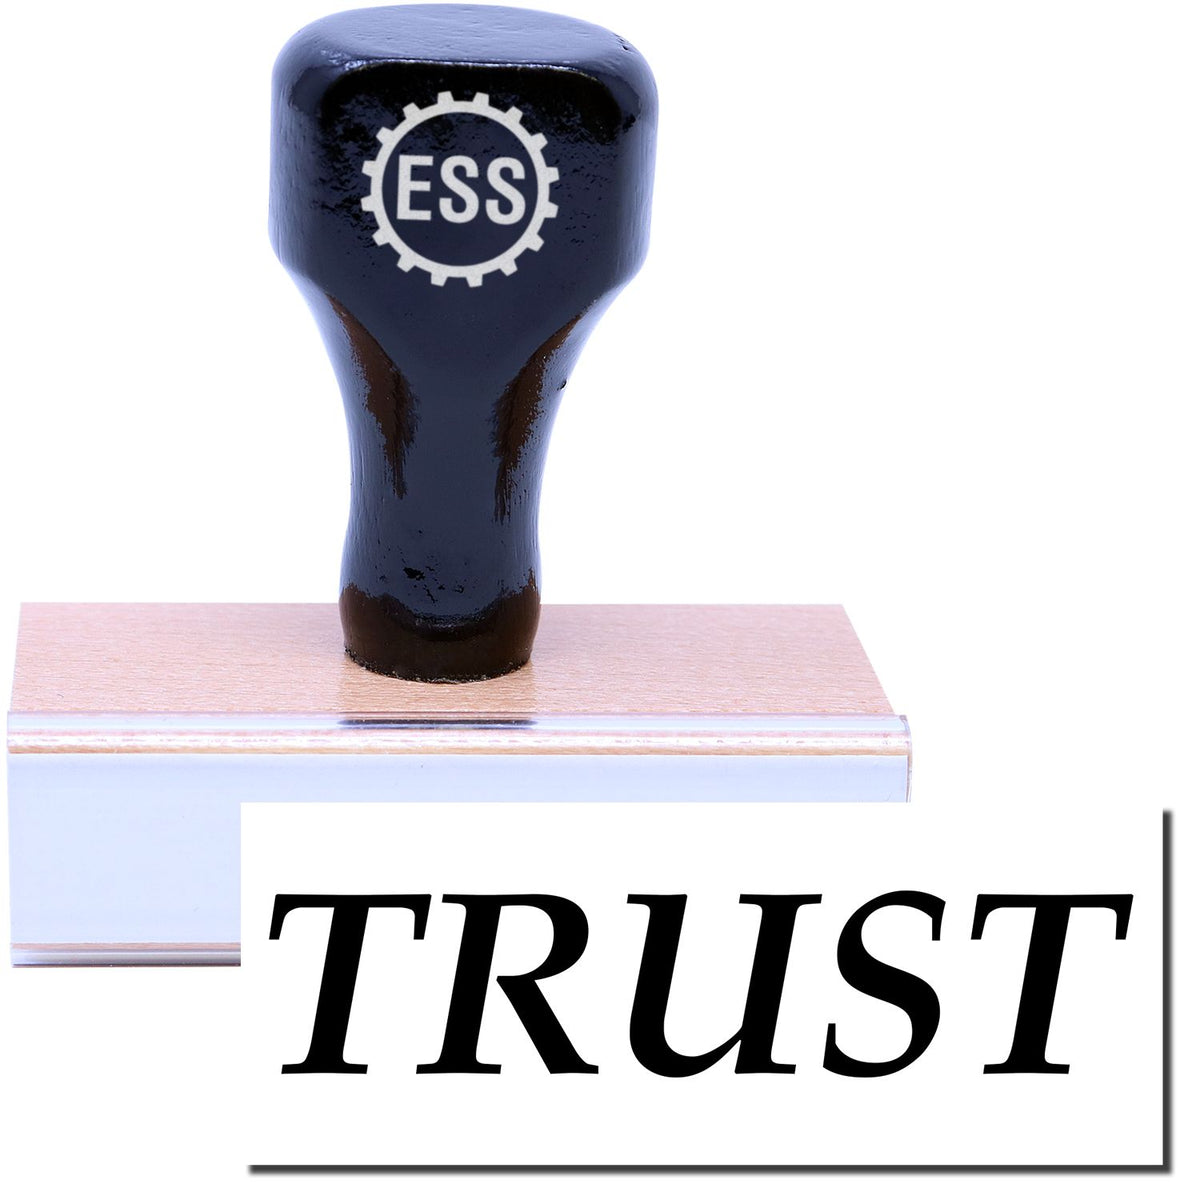 A stock office rubber stamp with a stamped image showing how the text &quot;TRUST&quot; in a large font is displayed after stamping.